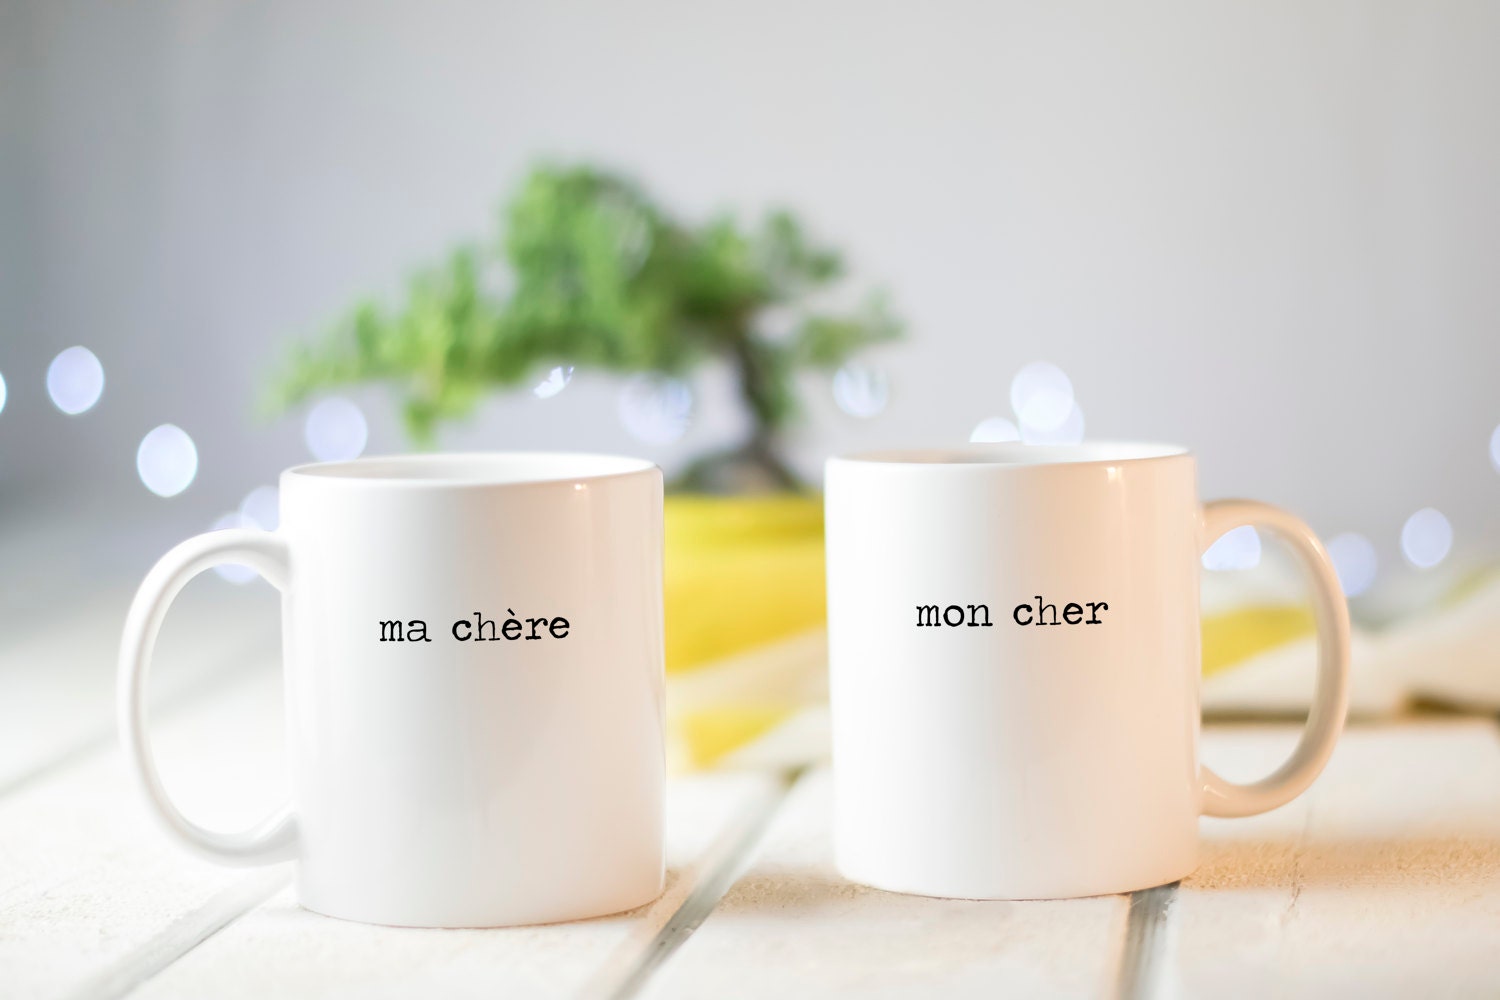 Mugs for couples | Valentines Day gift | wedding mugs | ma chère mon cher | mug set | unique mug | hipster | wedding gifts for couples